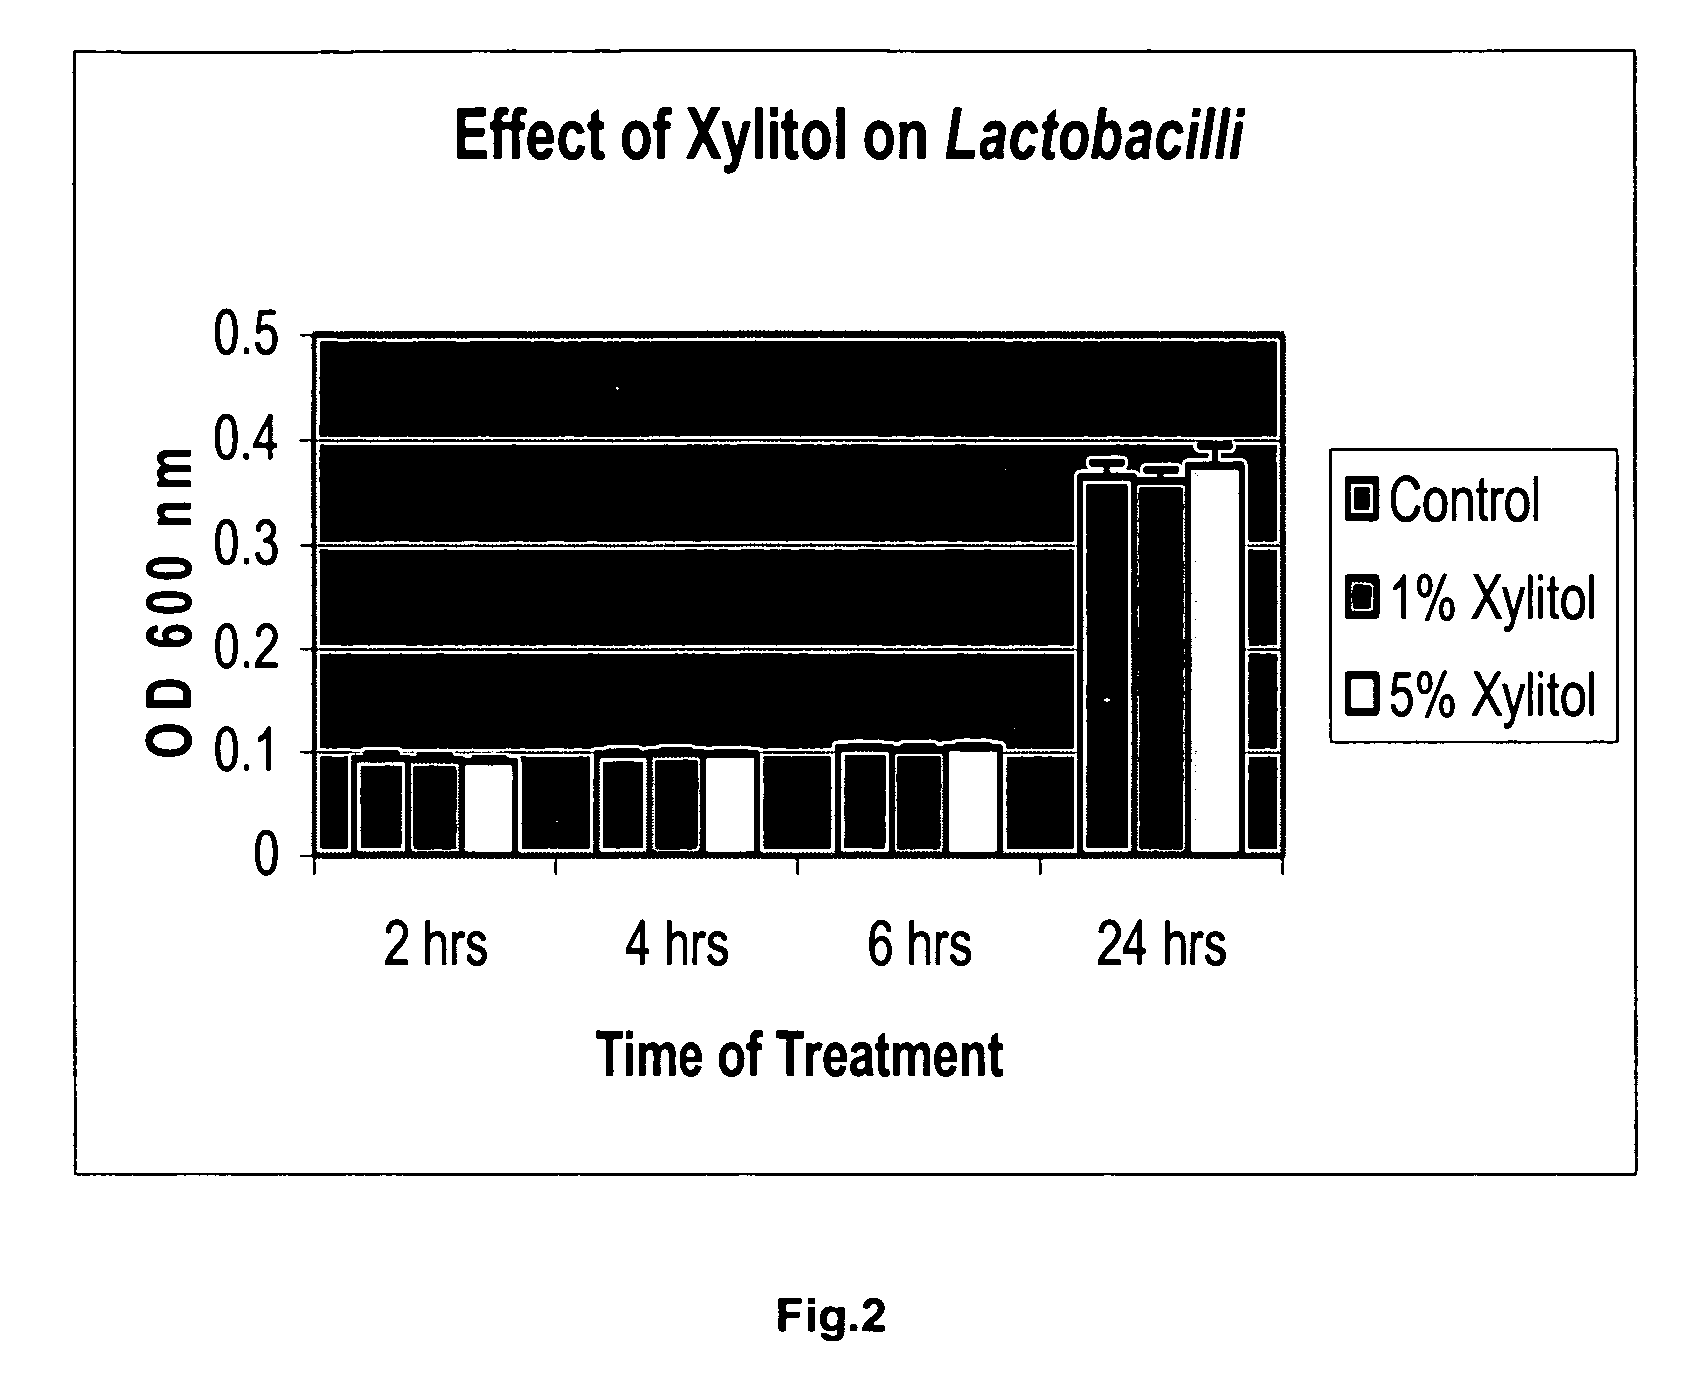 Compound and method for prevention and/or treatment of vaginal infections